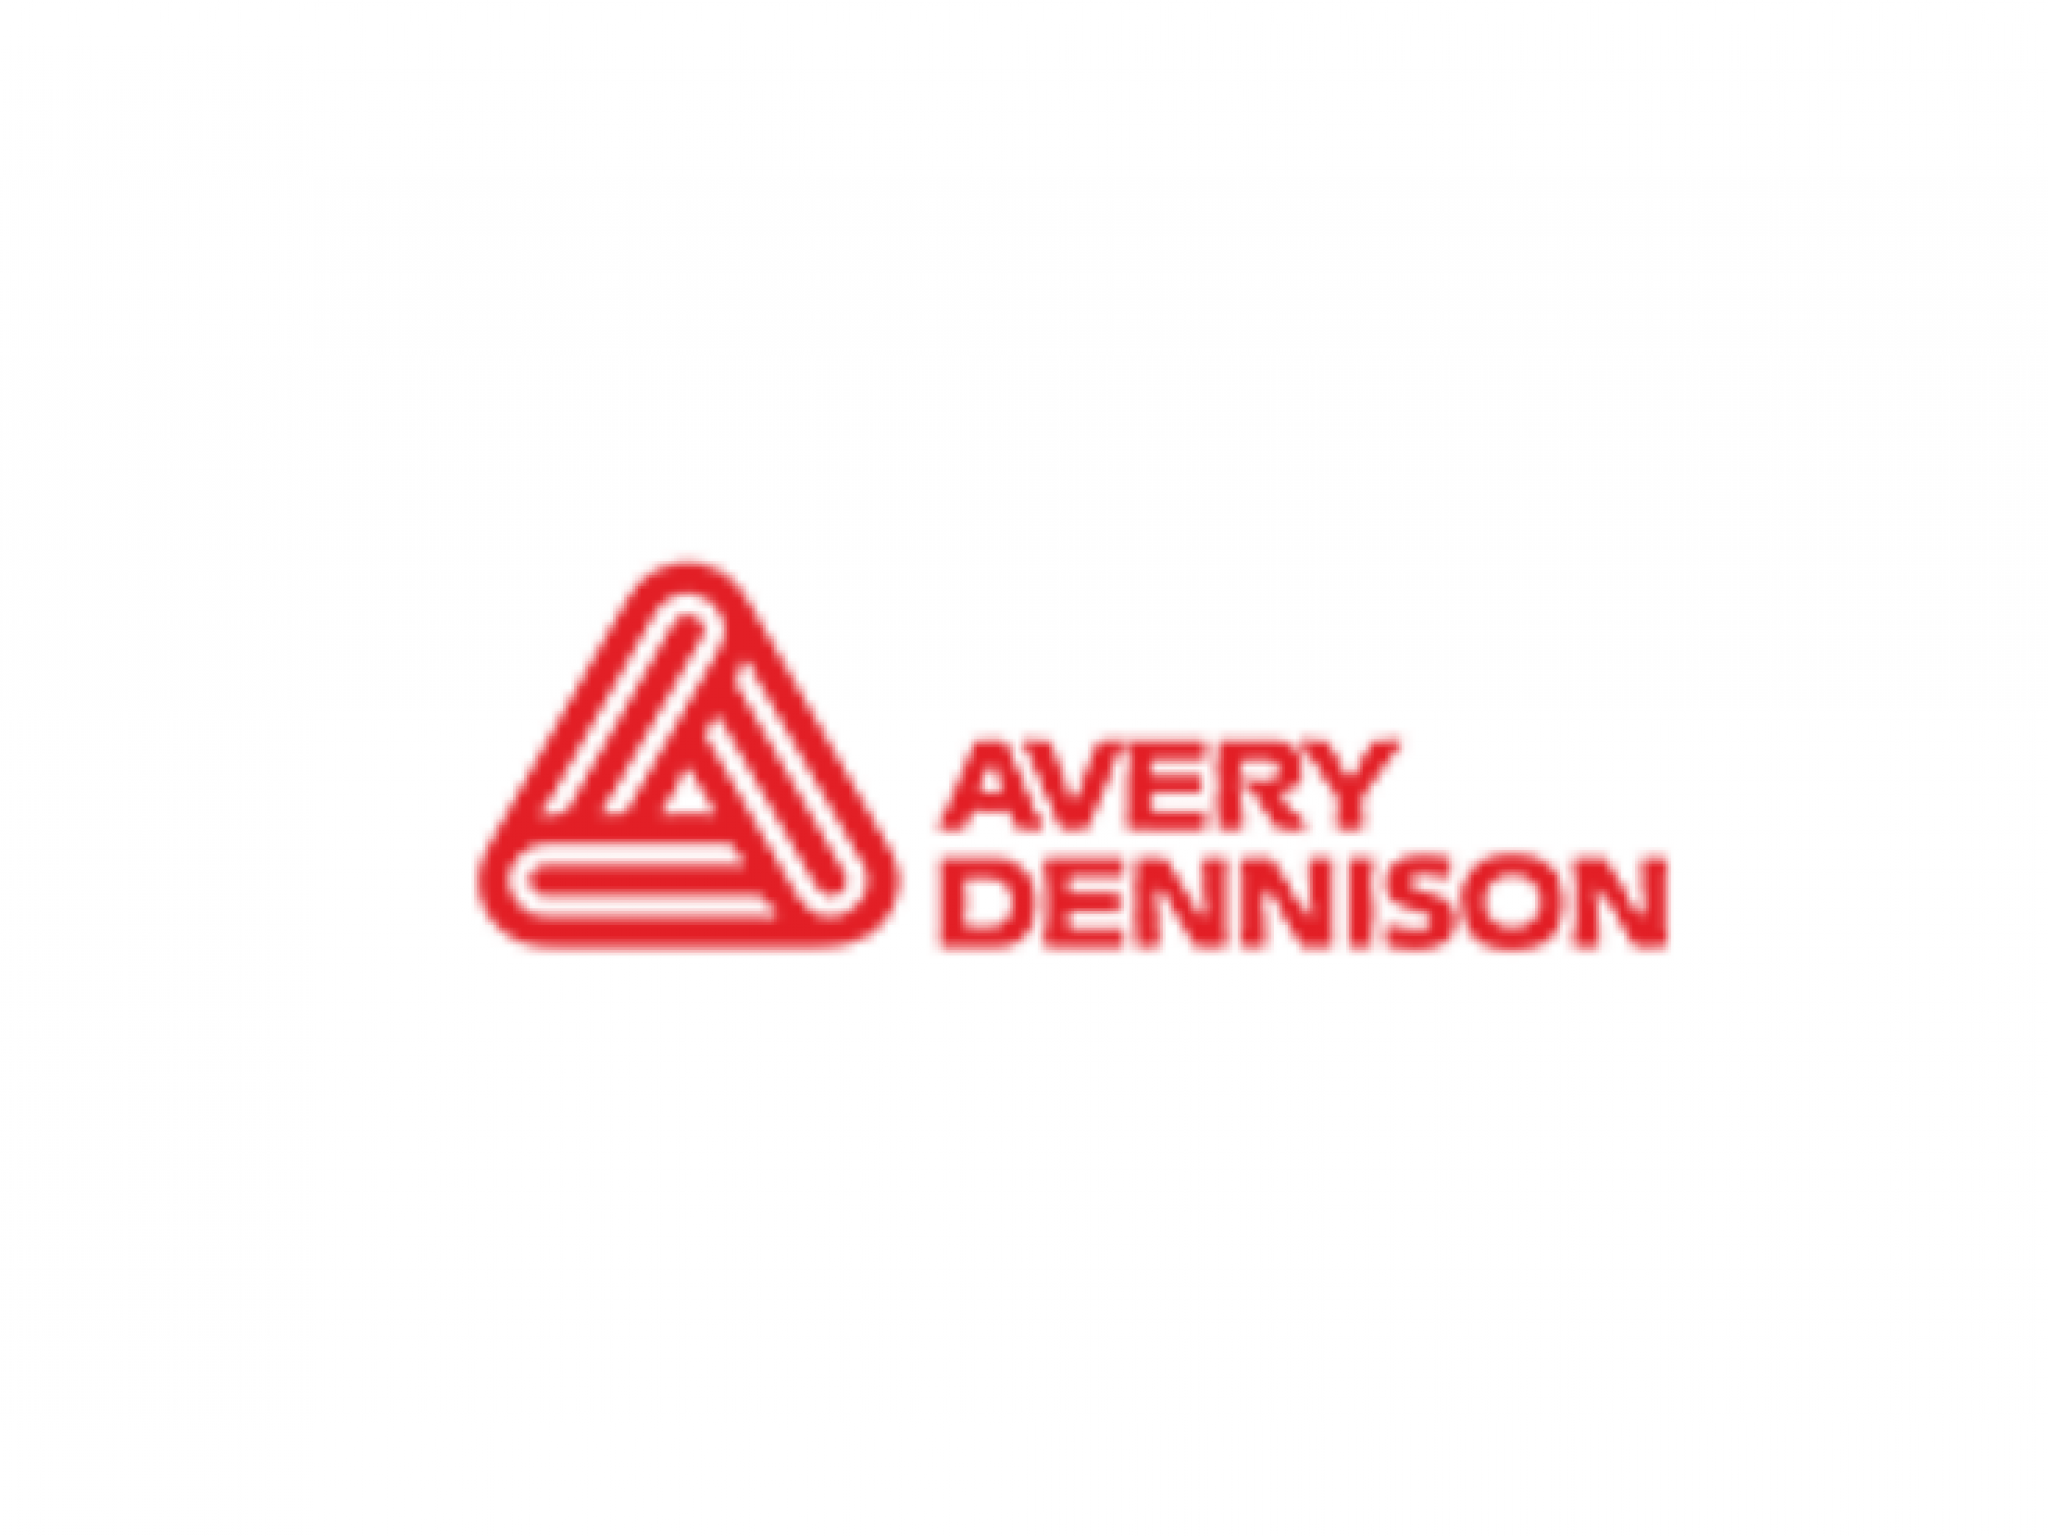  avery-dennison-stands-strong-analyst-reaffirms-buy-rating-unaffected-by-red-sea-supply-chain-concerns 